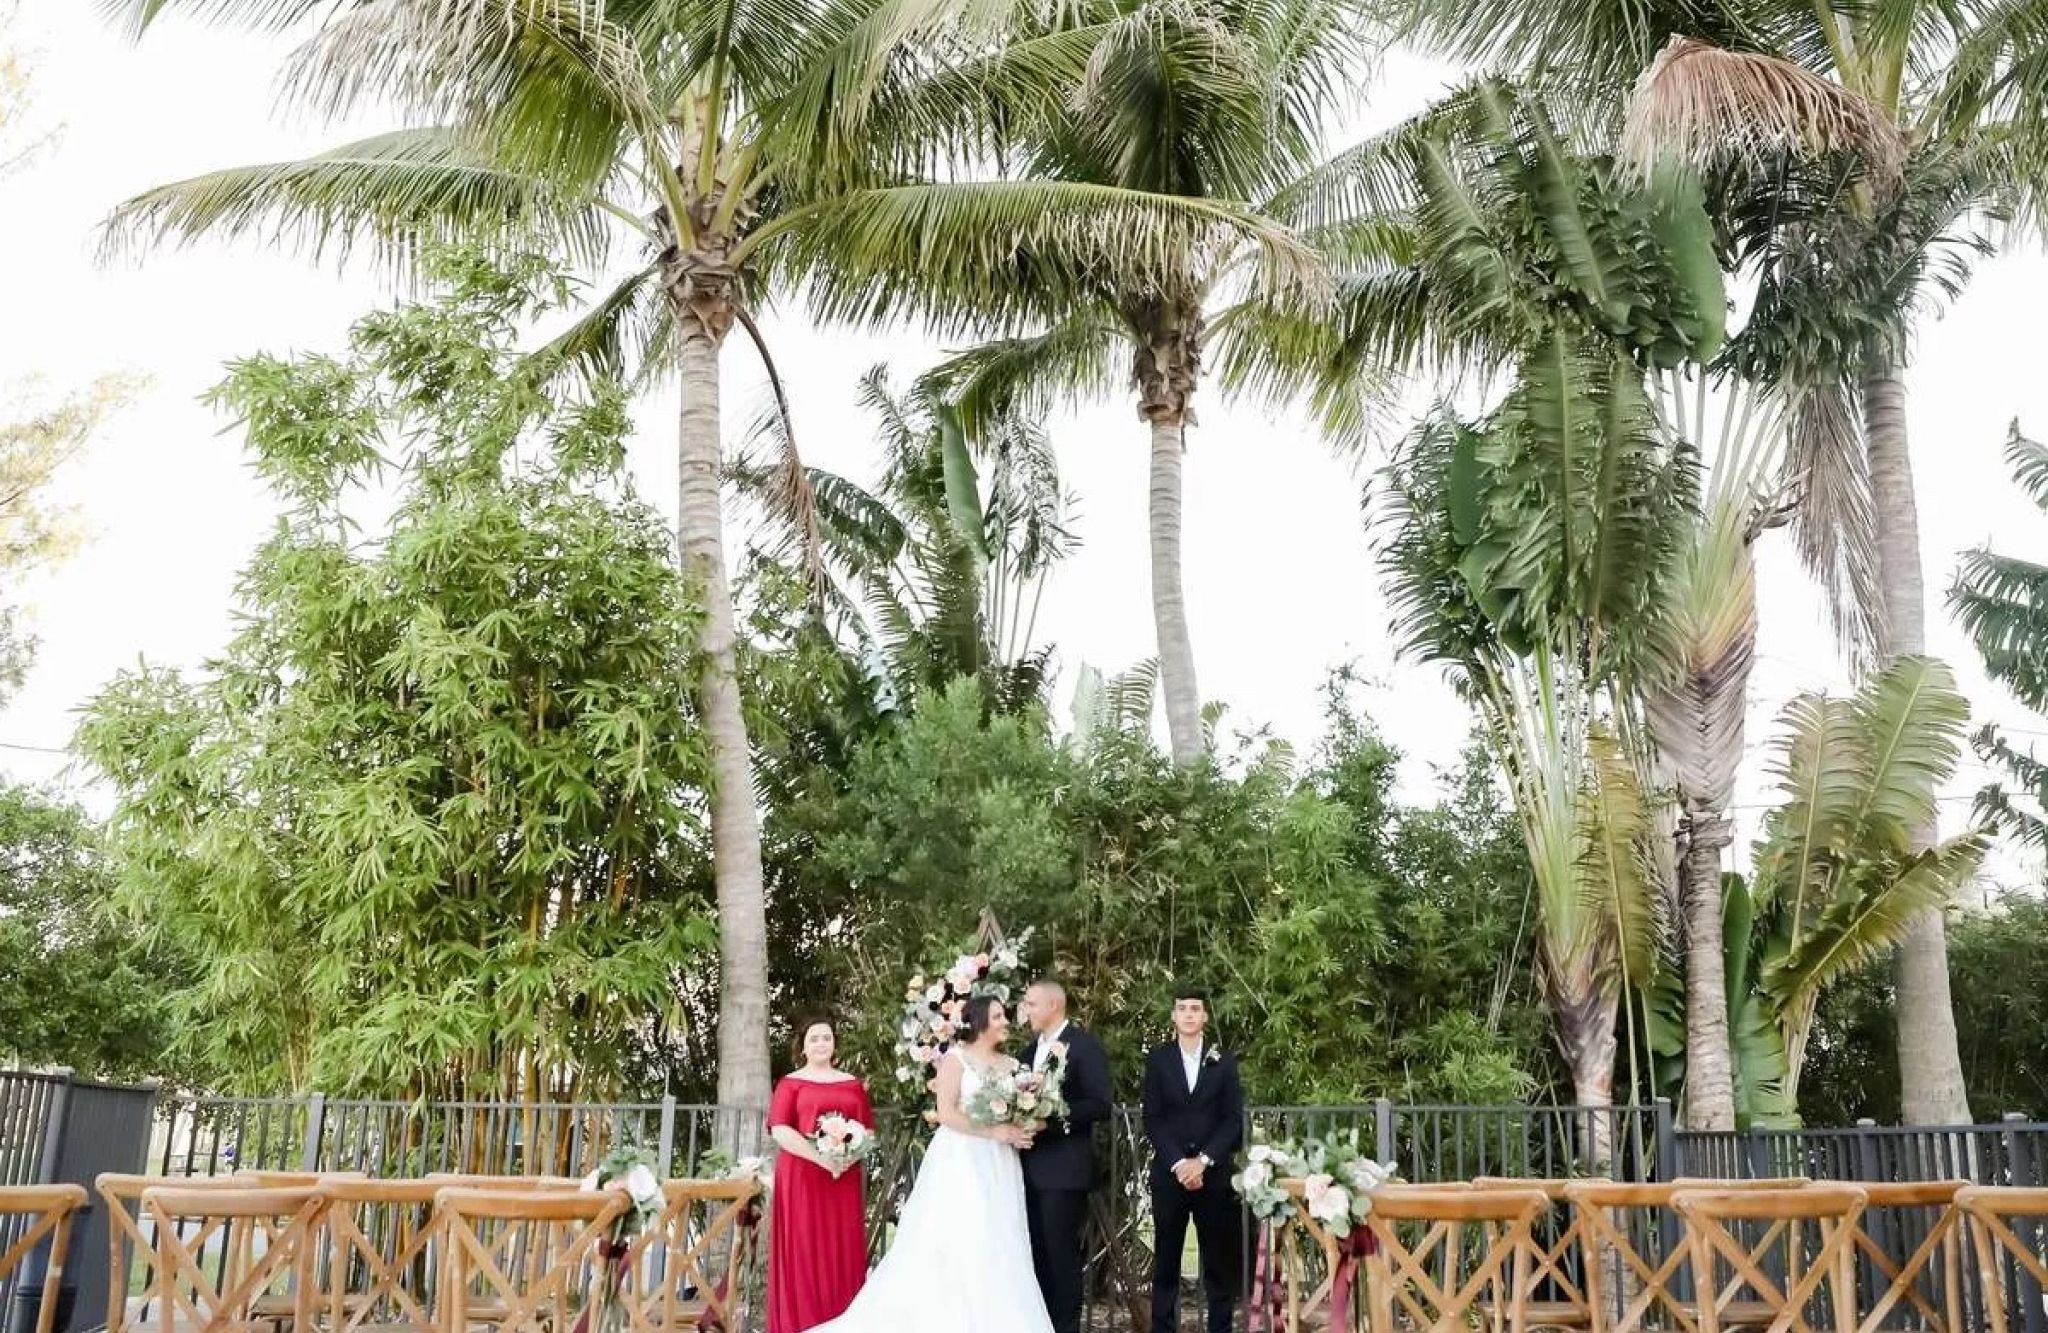 Outdoor wedding or event space with chairs and tropical plants all around